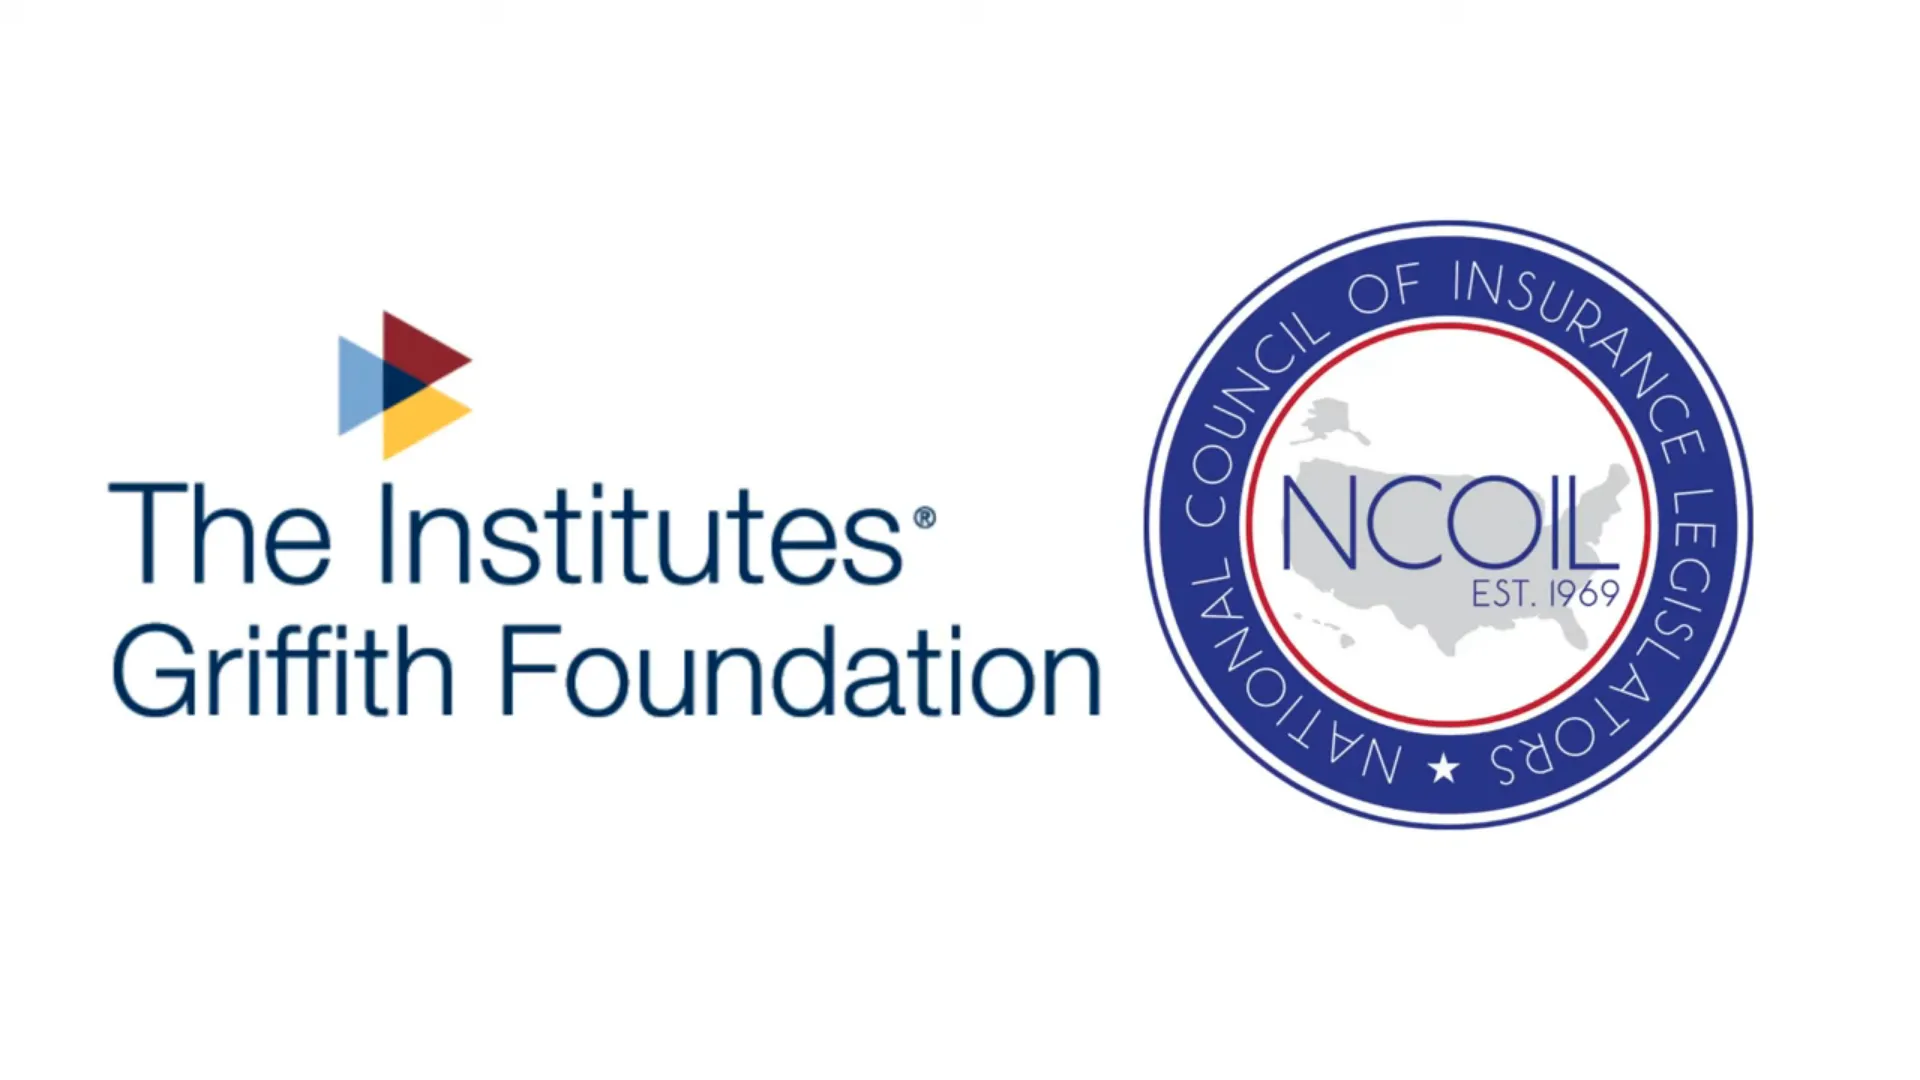 A white background containing the Griffith Foundation Logo next to the NCOIL logo